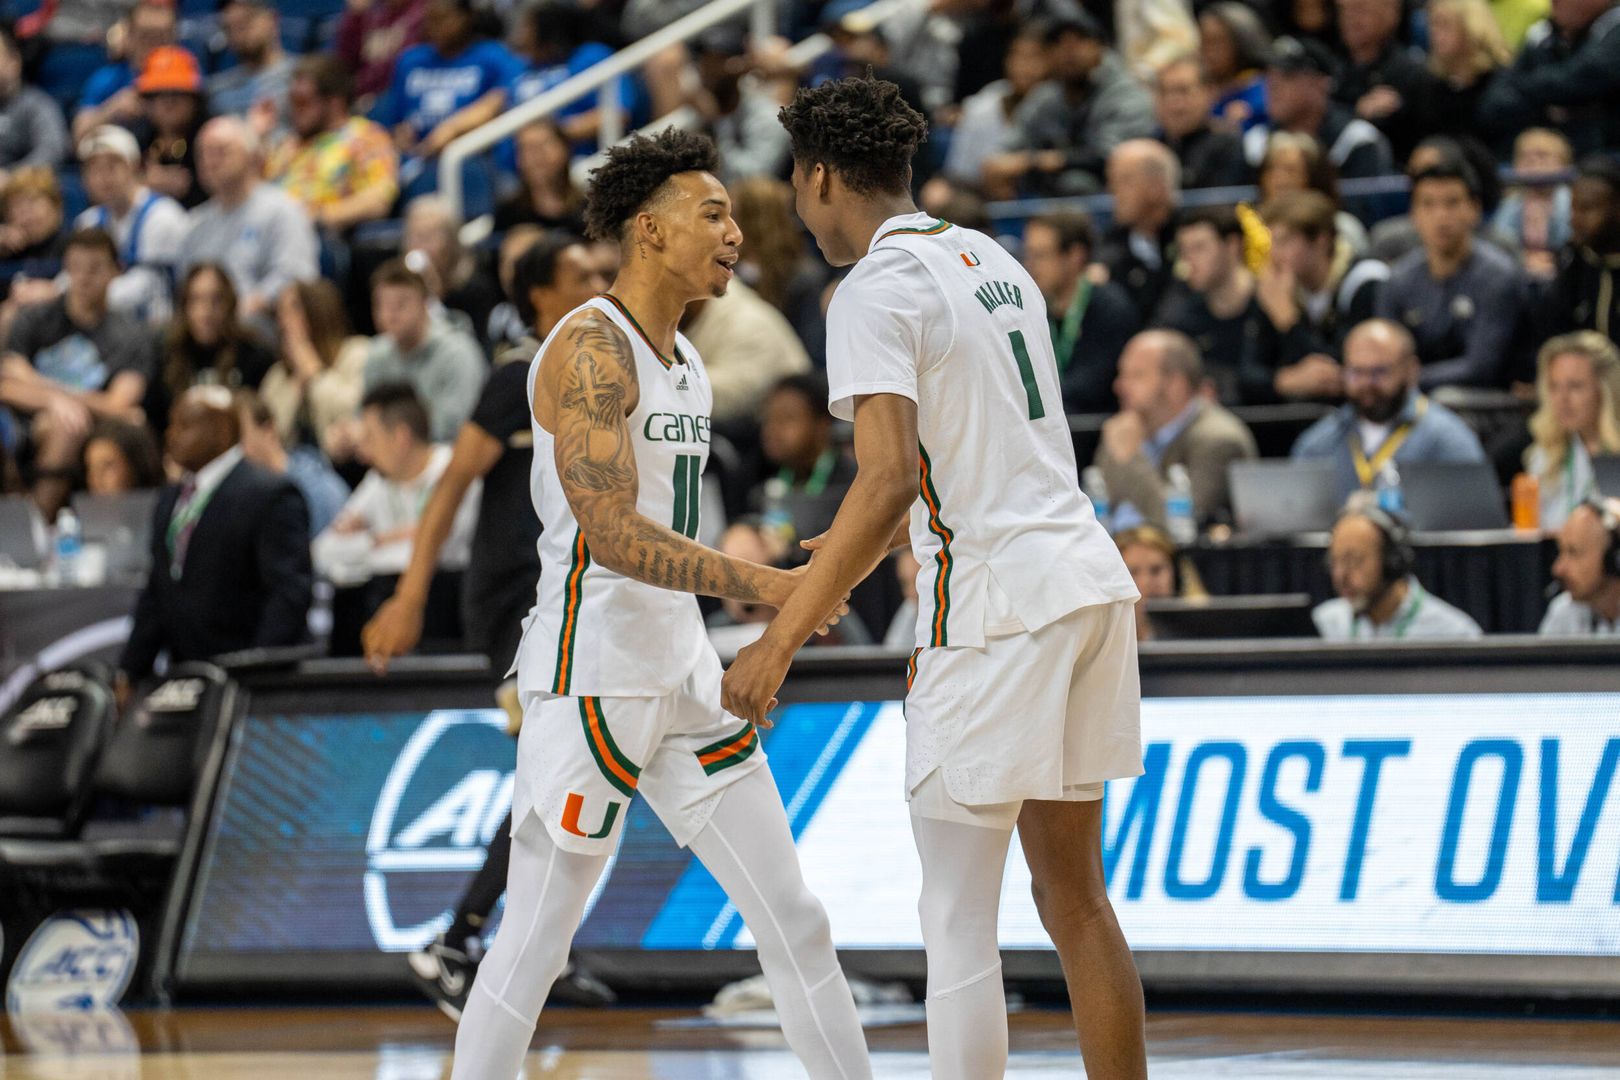 MBB Defeats Wake Forest, 74-72, in ACC Tournament Opener